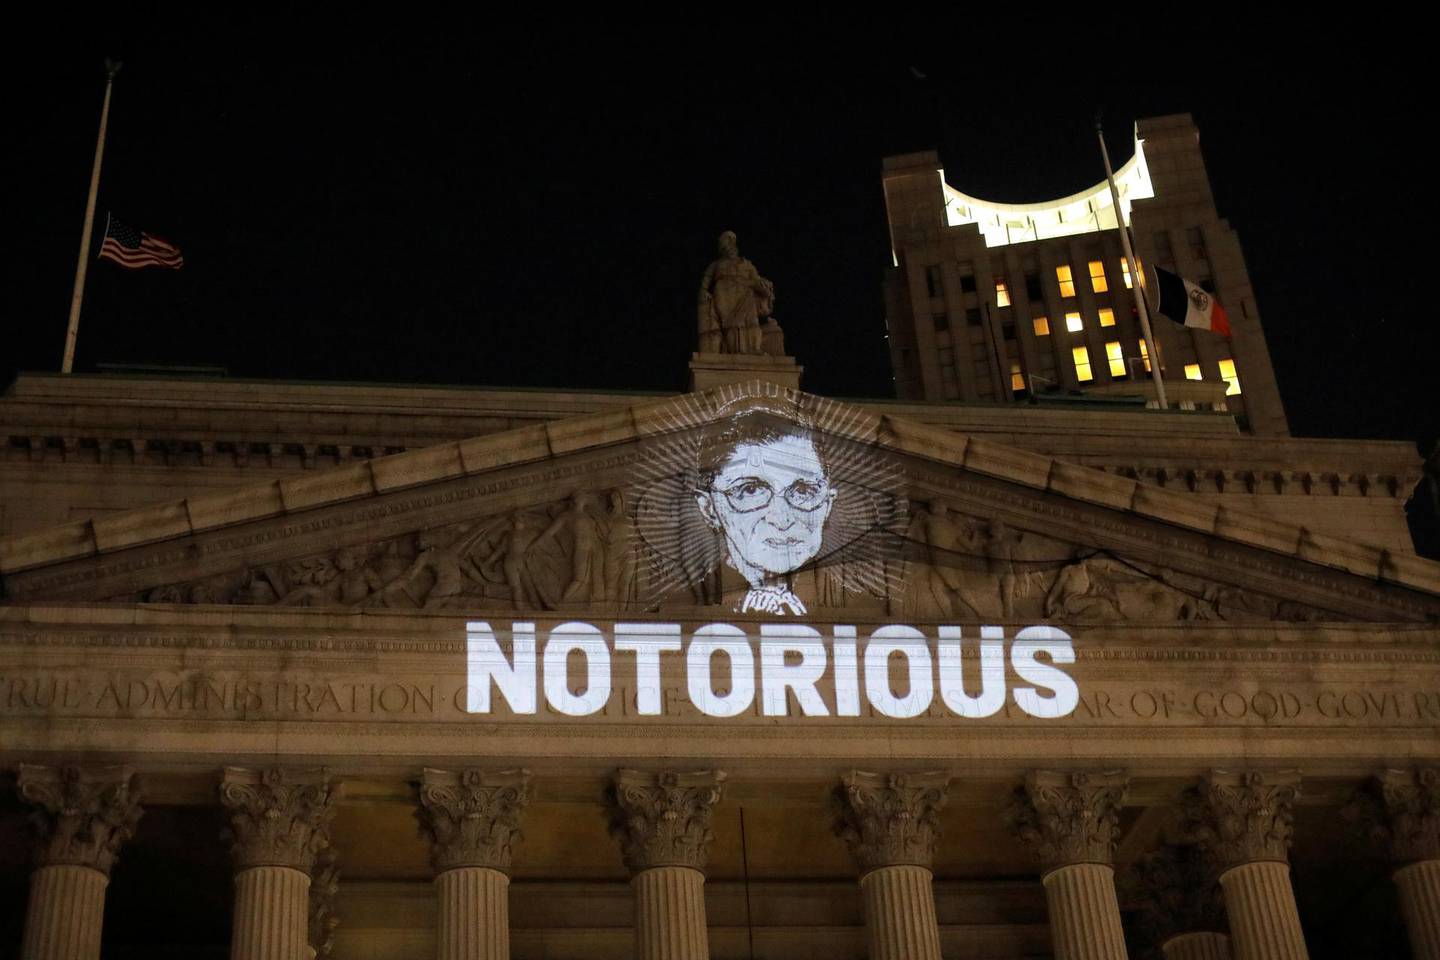 An image of Associate Justice of the Supreme Court of the United States Ruth Bader Ginsburg is projected onto the New York State Civil Supreme Court building in Manhattan, New York City, U.S. after she passed away September 18, 2020. REUTERS/Andrew Kelly